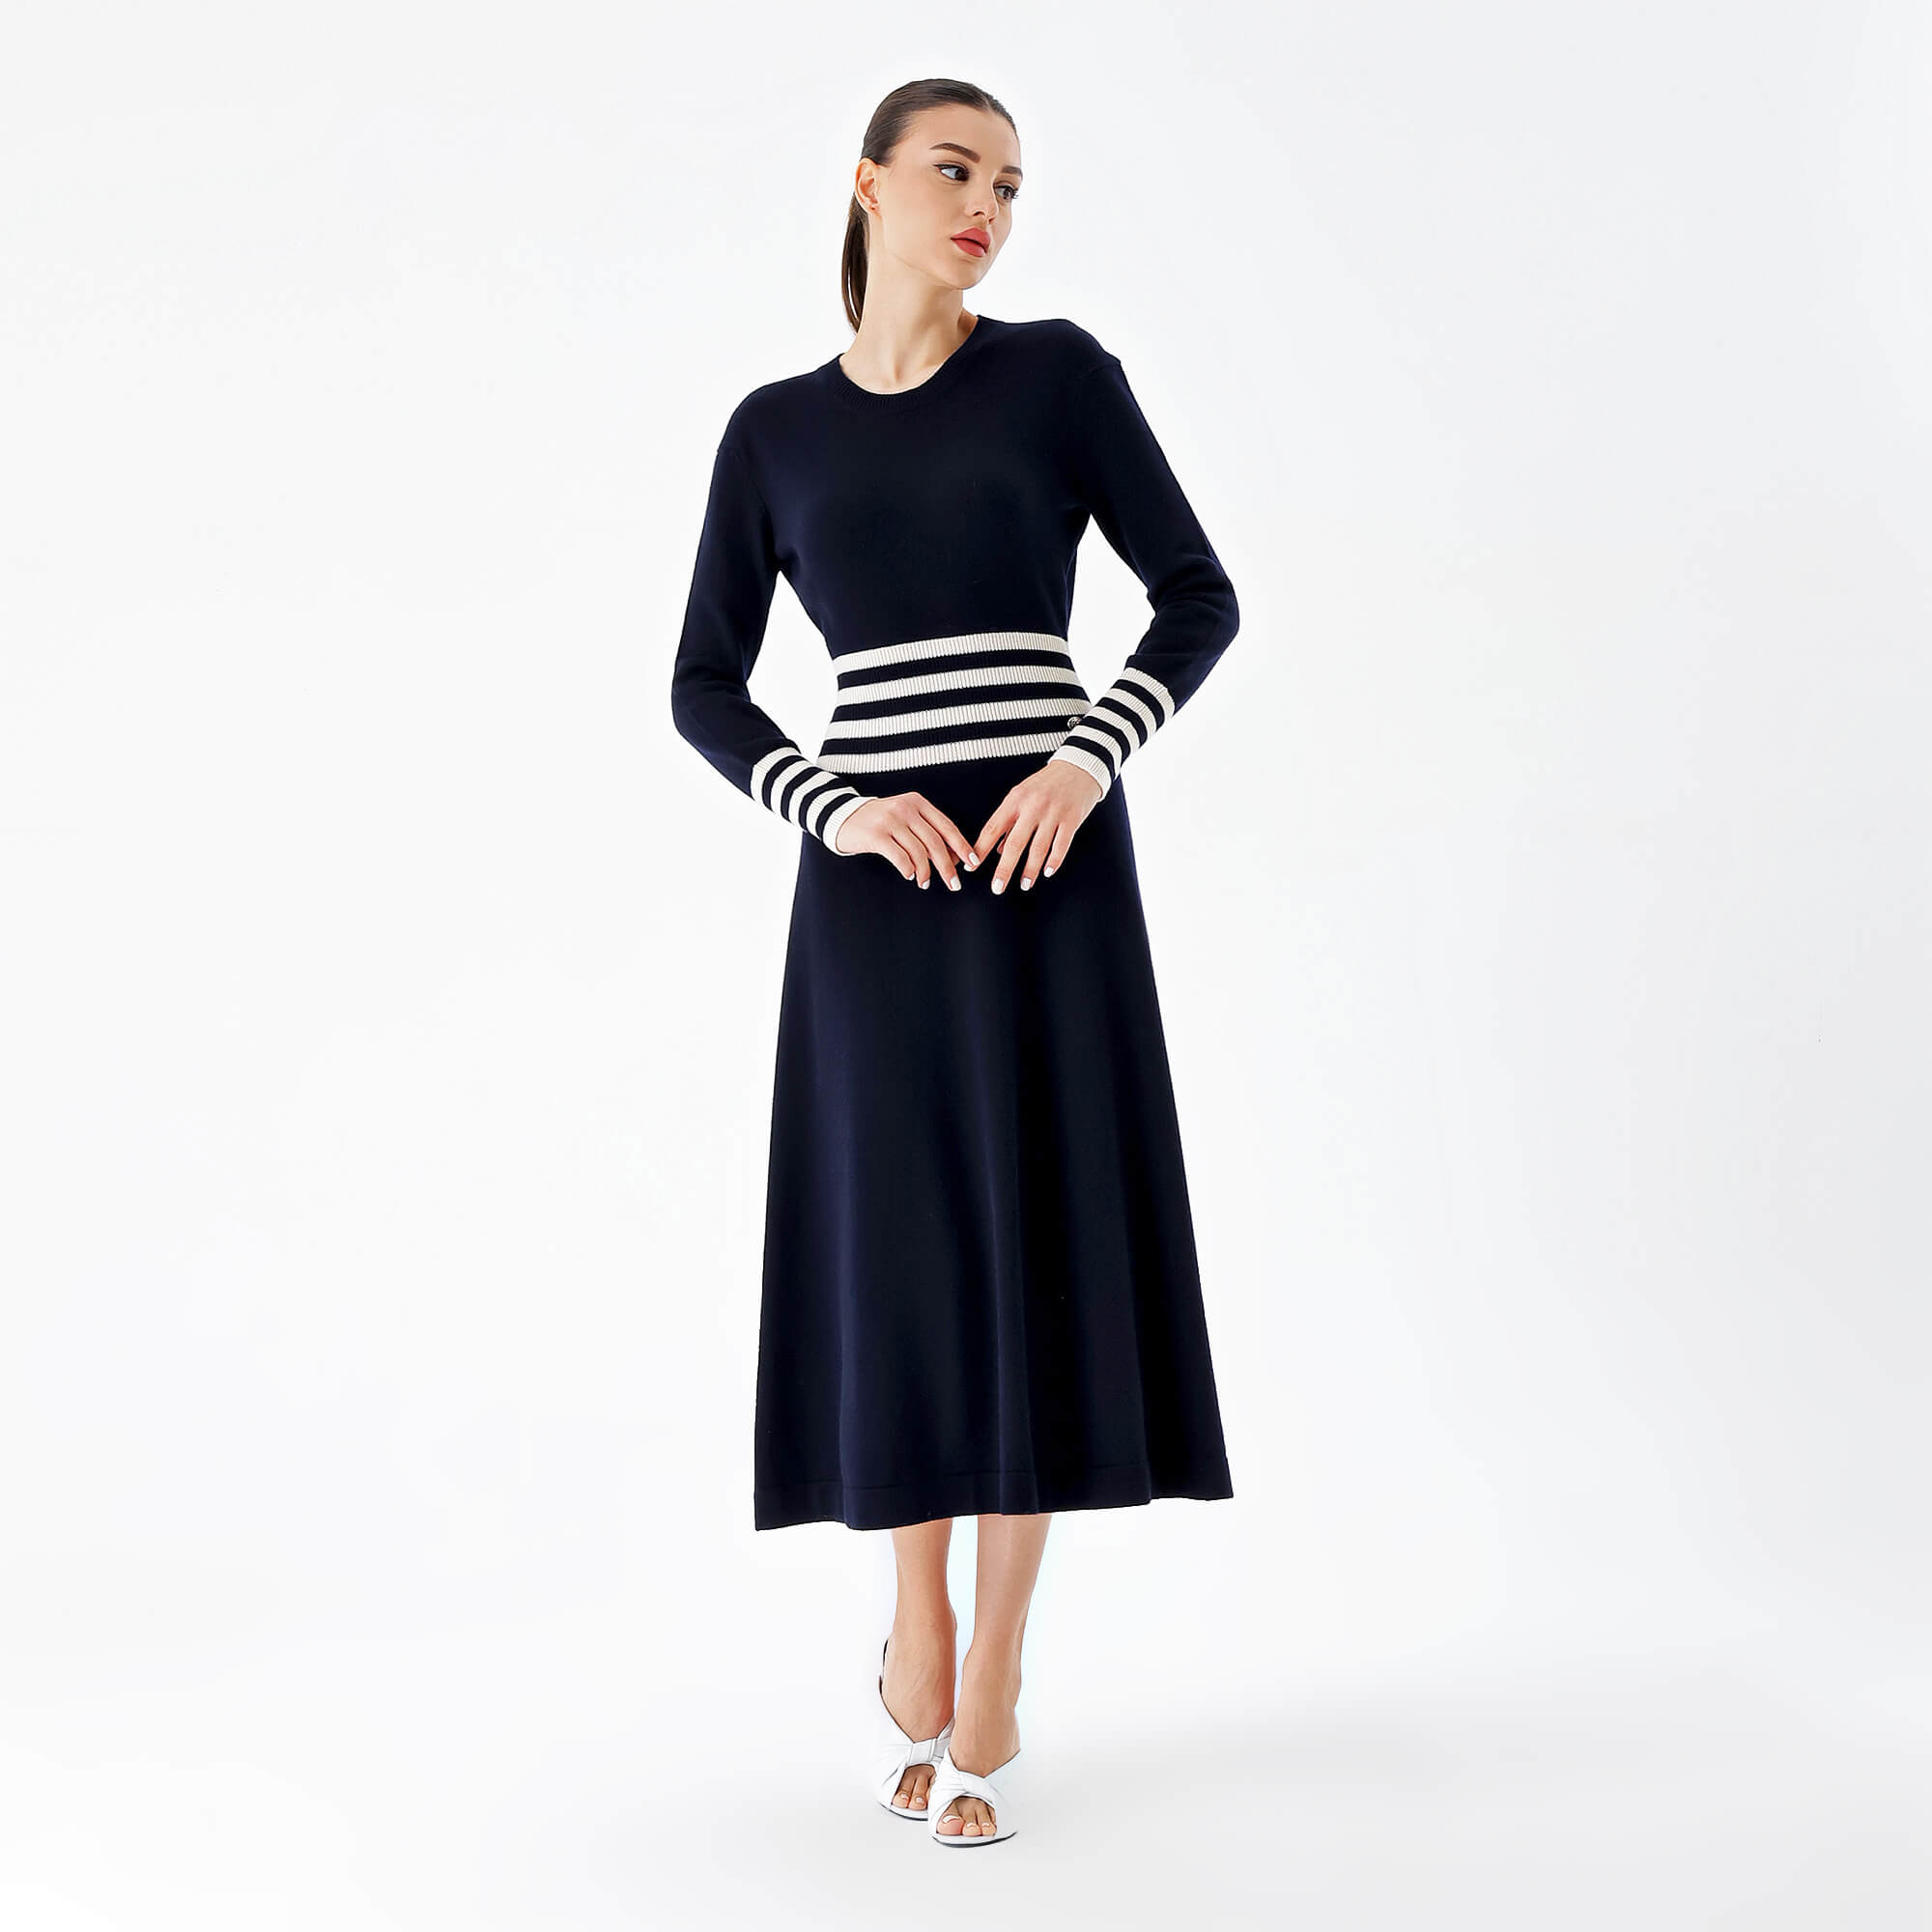 Chanel - Navy Blue Knitted Long Dress